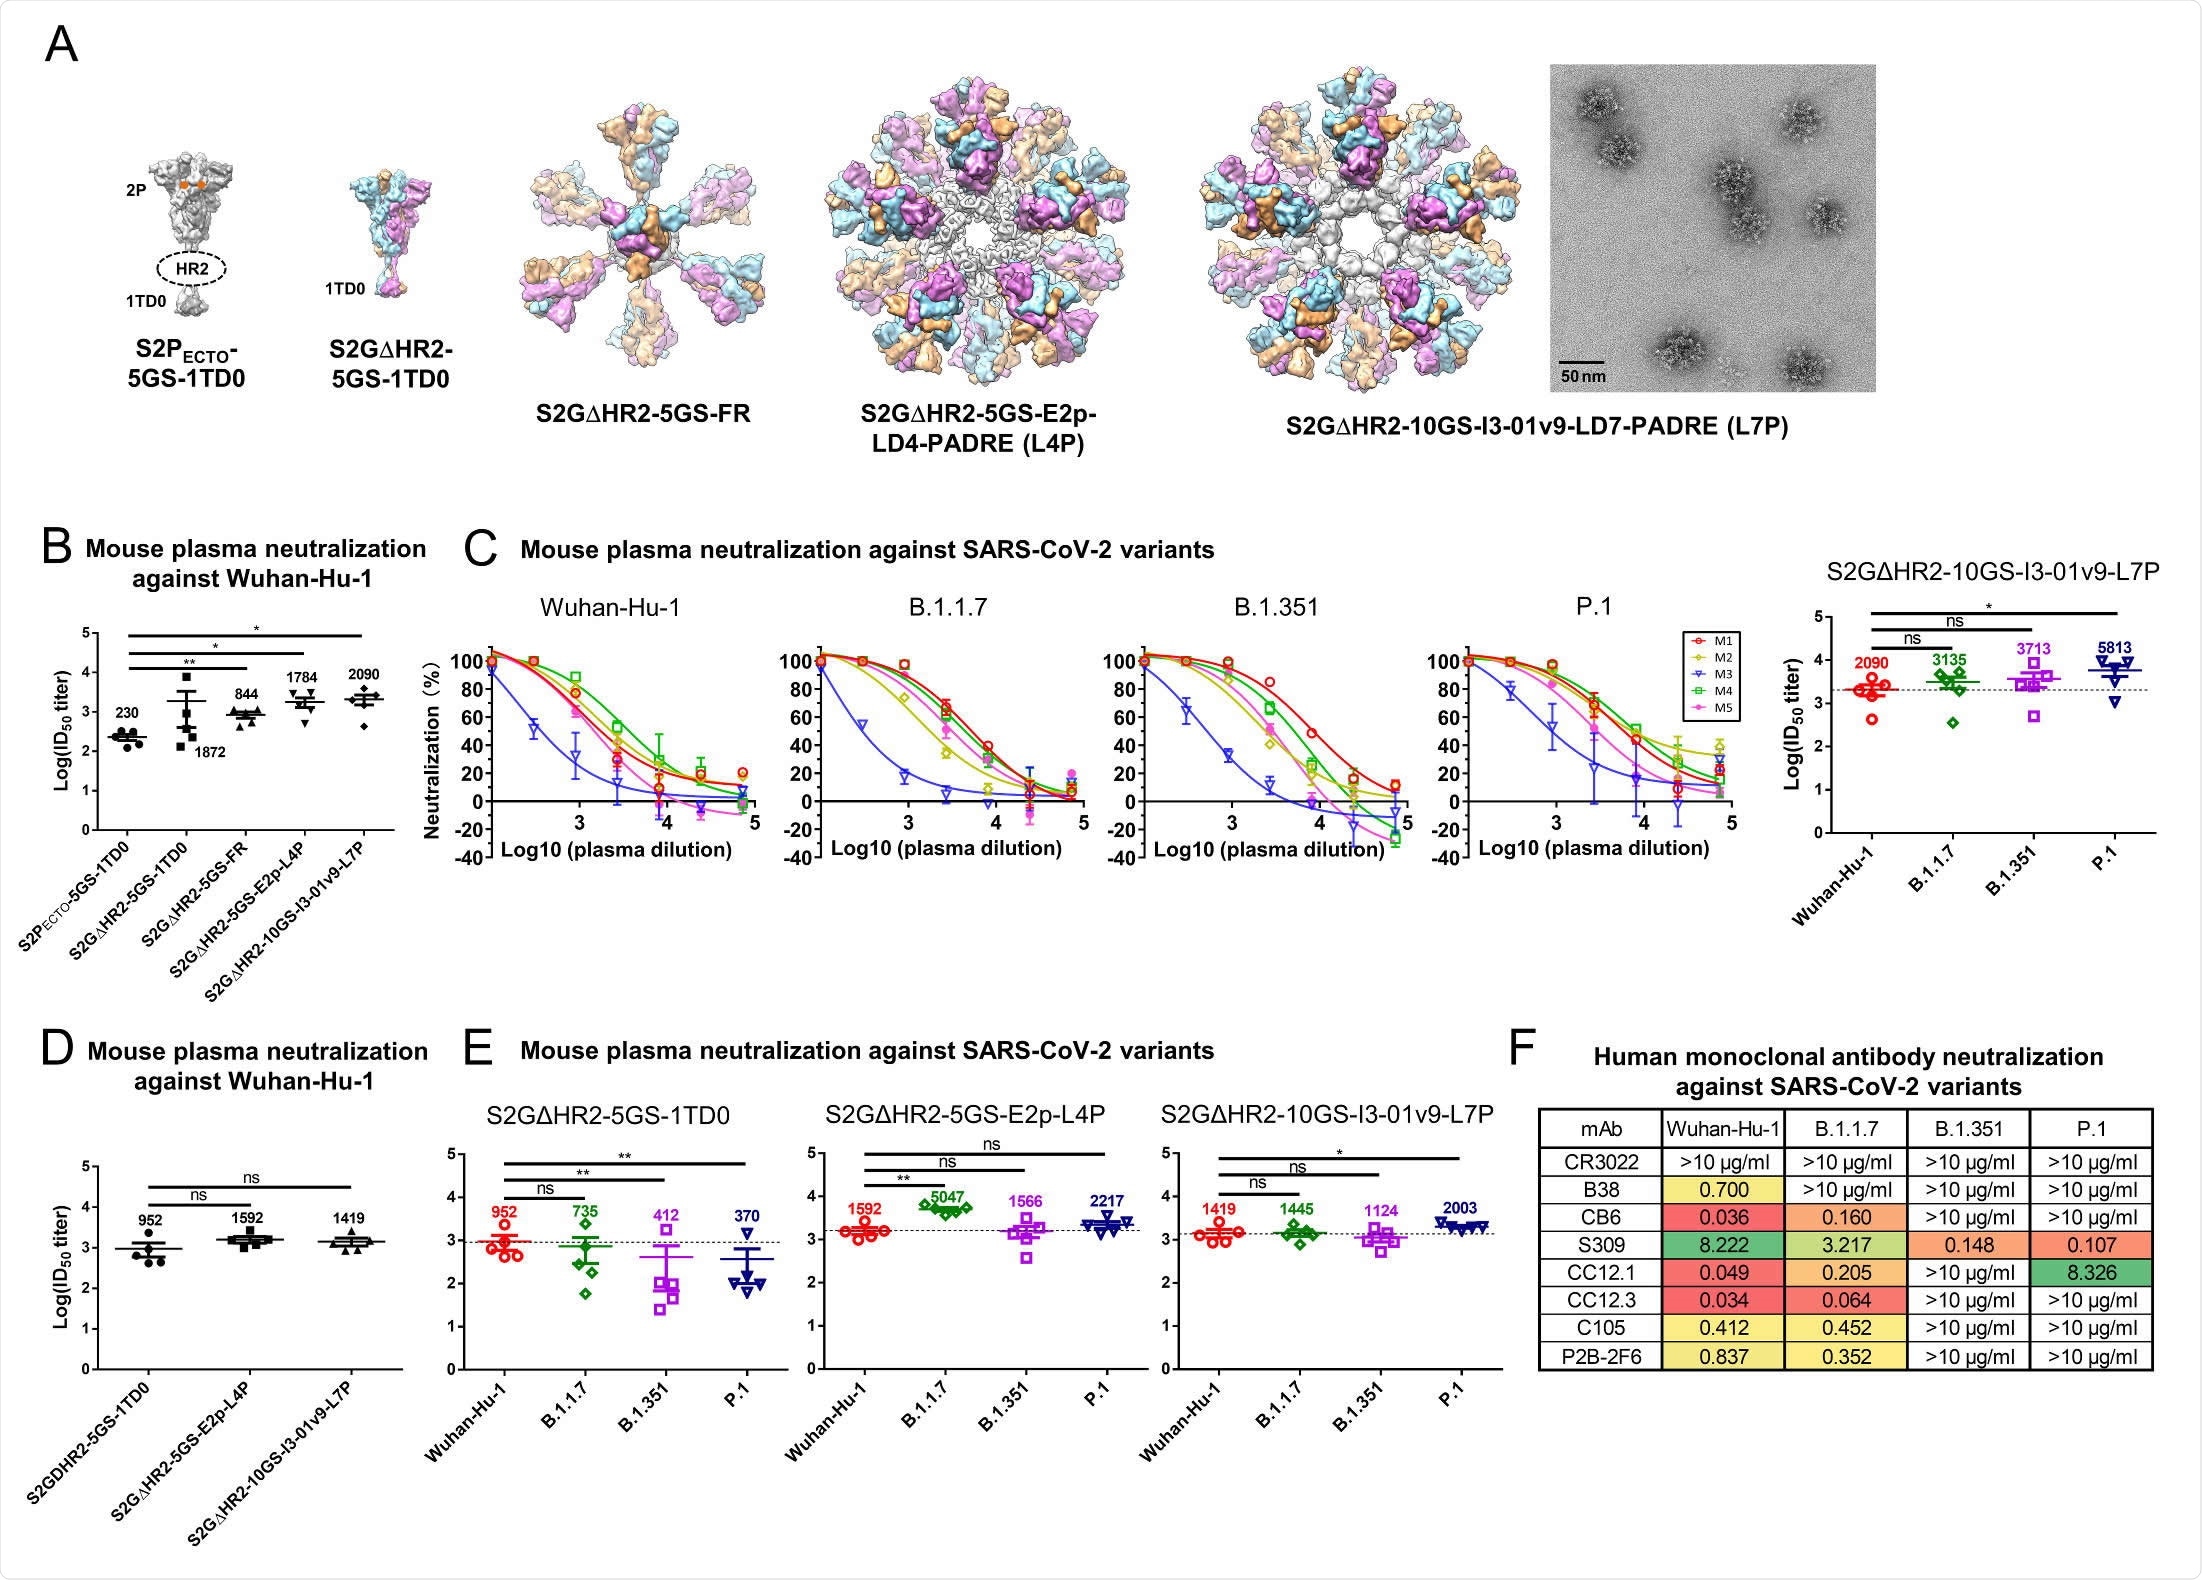 SARS-CoV-2 SApNP vaccines induce broadly neutralizing antibody responses to three variants of concern. (A) Molecular surface representations of vaccine constructs, including two spikes (S2PECTO-5GS-1TD0 and S2GΔHR2-5GS-1TD0) and three spike presenting SApNPs (S2GΔHR2-5GS-ferritin (FR), S2GΔHR2-5GS-E2p-LD4-PADRE (E2p687 L4P), and S2GΔHR2-10GS-I3-01v9-LD7-PADRE (I3-01v9-L7P)). Representative negative stain EM (nsEM) image of S2GΔHR2-10GS- I3-01v9-L7P SApNPs is shown on the right. (B) Neutralization of the original Wuhan-Hu-1 strain by mouse plasma induced by 5 different vaccines at week 5 after two intraperitoneal injections. ID50 titers derived from SARS-CoV-2-pp neutralization assays are plotted, with average ID50 values labeled on the plots. (C) Mouse plasma neutralization against the original Wuhan-Hu-1 strain and three variants, B.1.1.7, B1.351, and P.1, at week 5 after two intraperitoneal injections of the adjuvanted S2GΔHR2-10GS-I3- 01v9-L7P vaccine. Left panels 1-4: percent neutralization plots of individual mice against 4 SARS-CoV-2 strains; Right panel: ID50 plot. In (B) and (C), the plasma samples were generated in the previous study (41), where mice were immunized with 50 μg of adjuvanted vaccine antigen. (D) Neutralization of the original Wuhan-Hu-1 strain by mouse plasma induced the S2GΔHR2 spike and two large S2GΔHR2-presenting SApNPs. Vaccines were administered via footpad injections (0.8 μg/injection, for a total of 3.3 μg/mouse). (E) Mouse plasma neutralization against the original Wuhan-Hu-1 strain and three variants, B.1.1.7, B1.351, and P.1, at week 5 after two footpad injections of the S2GΔHR2 spike and two large S2GΔHR2- presenting SApNPs. In (B)-(E), the ID50 values are plotted as mean ± SEM. The data were analyzed using two-tailed unpaired Student’s t-test for comparison between different vaccine groups or two-tailed paired Student’s t-test for comparison of ID50 titers against SARS-Cov-2 variants using the same plasma samples from a mouse. *p < 0.05, **p < 0.01. (F) Neutralization of four SARS-CoV-2 strains by human monoclonal antibodies including CR3022, B38, CB6, S309, CC12.1, CC12.3, C105, and P2B-2F6. IC50 values are listed and color-coded (white: no neutralization; green to red: low to high). The IC50 values were calculated with the %neutralization range constrained within 0.0-100.0%.